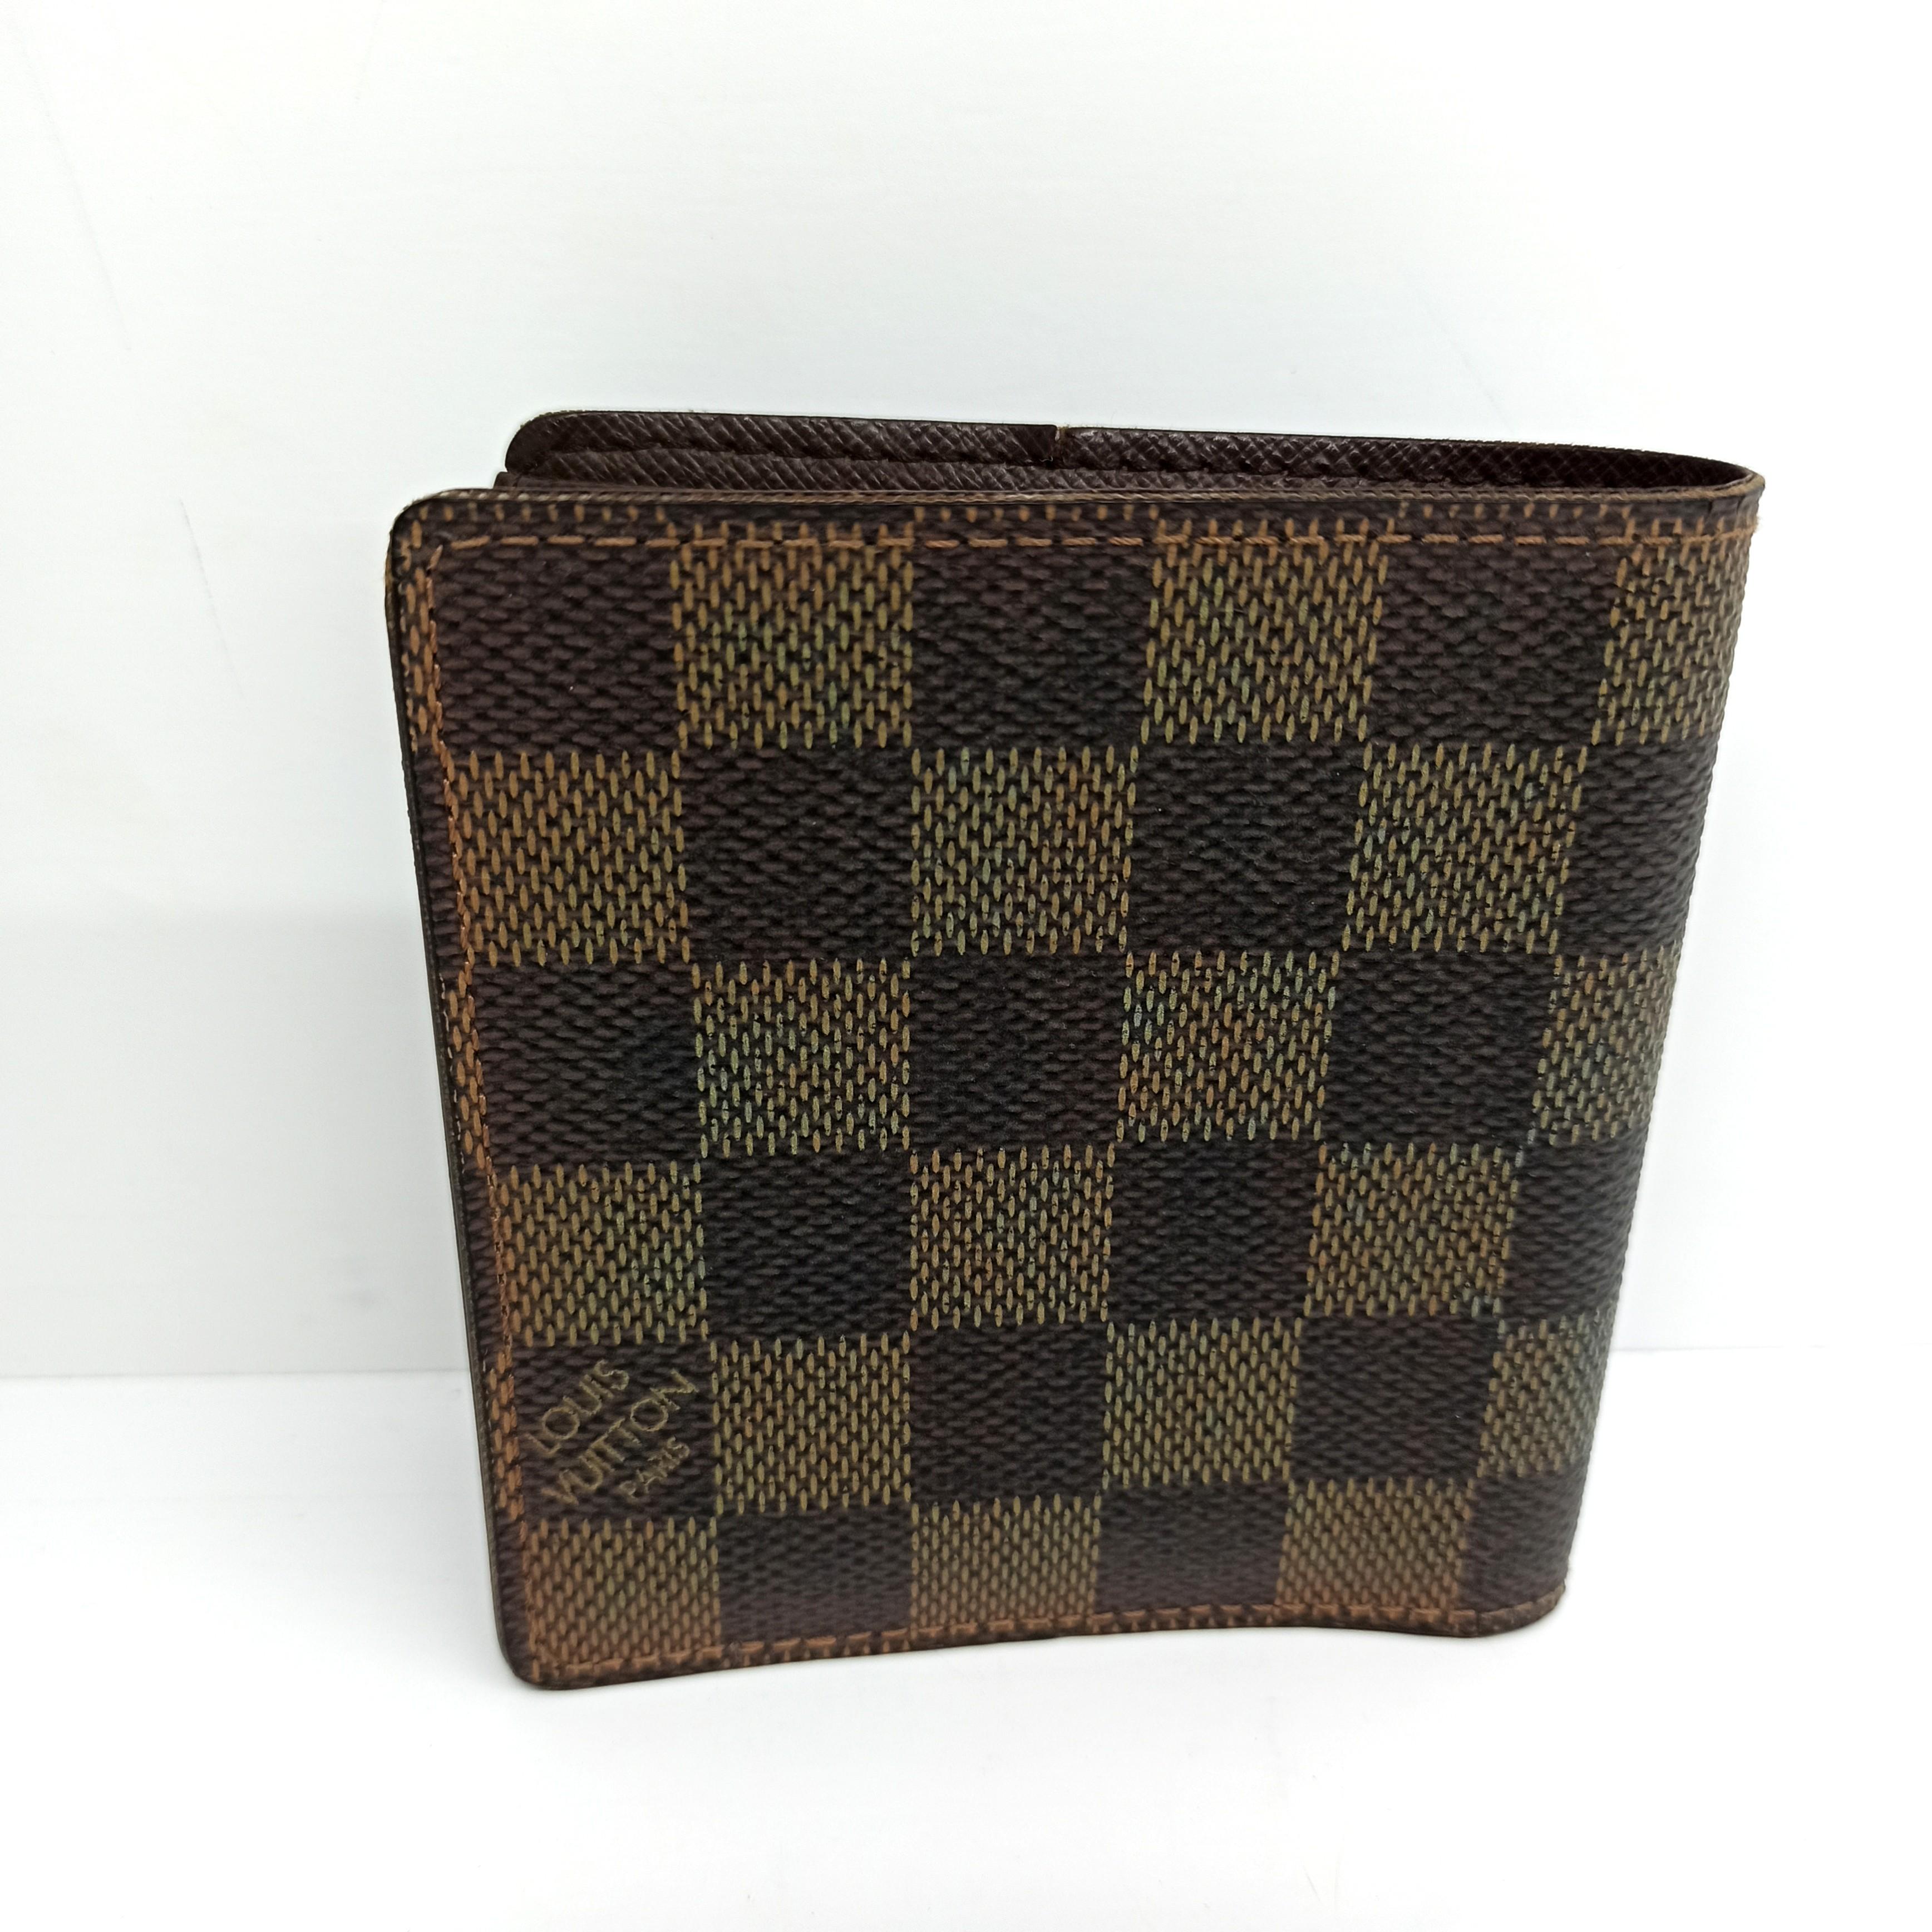 Pin by Branded_dxb on wallet  Louis vuitton, Louis vuitton